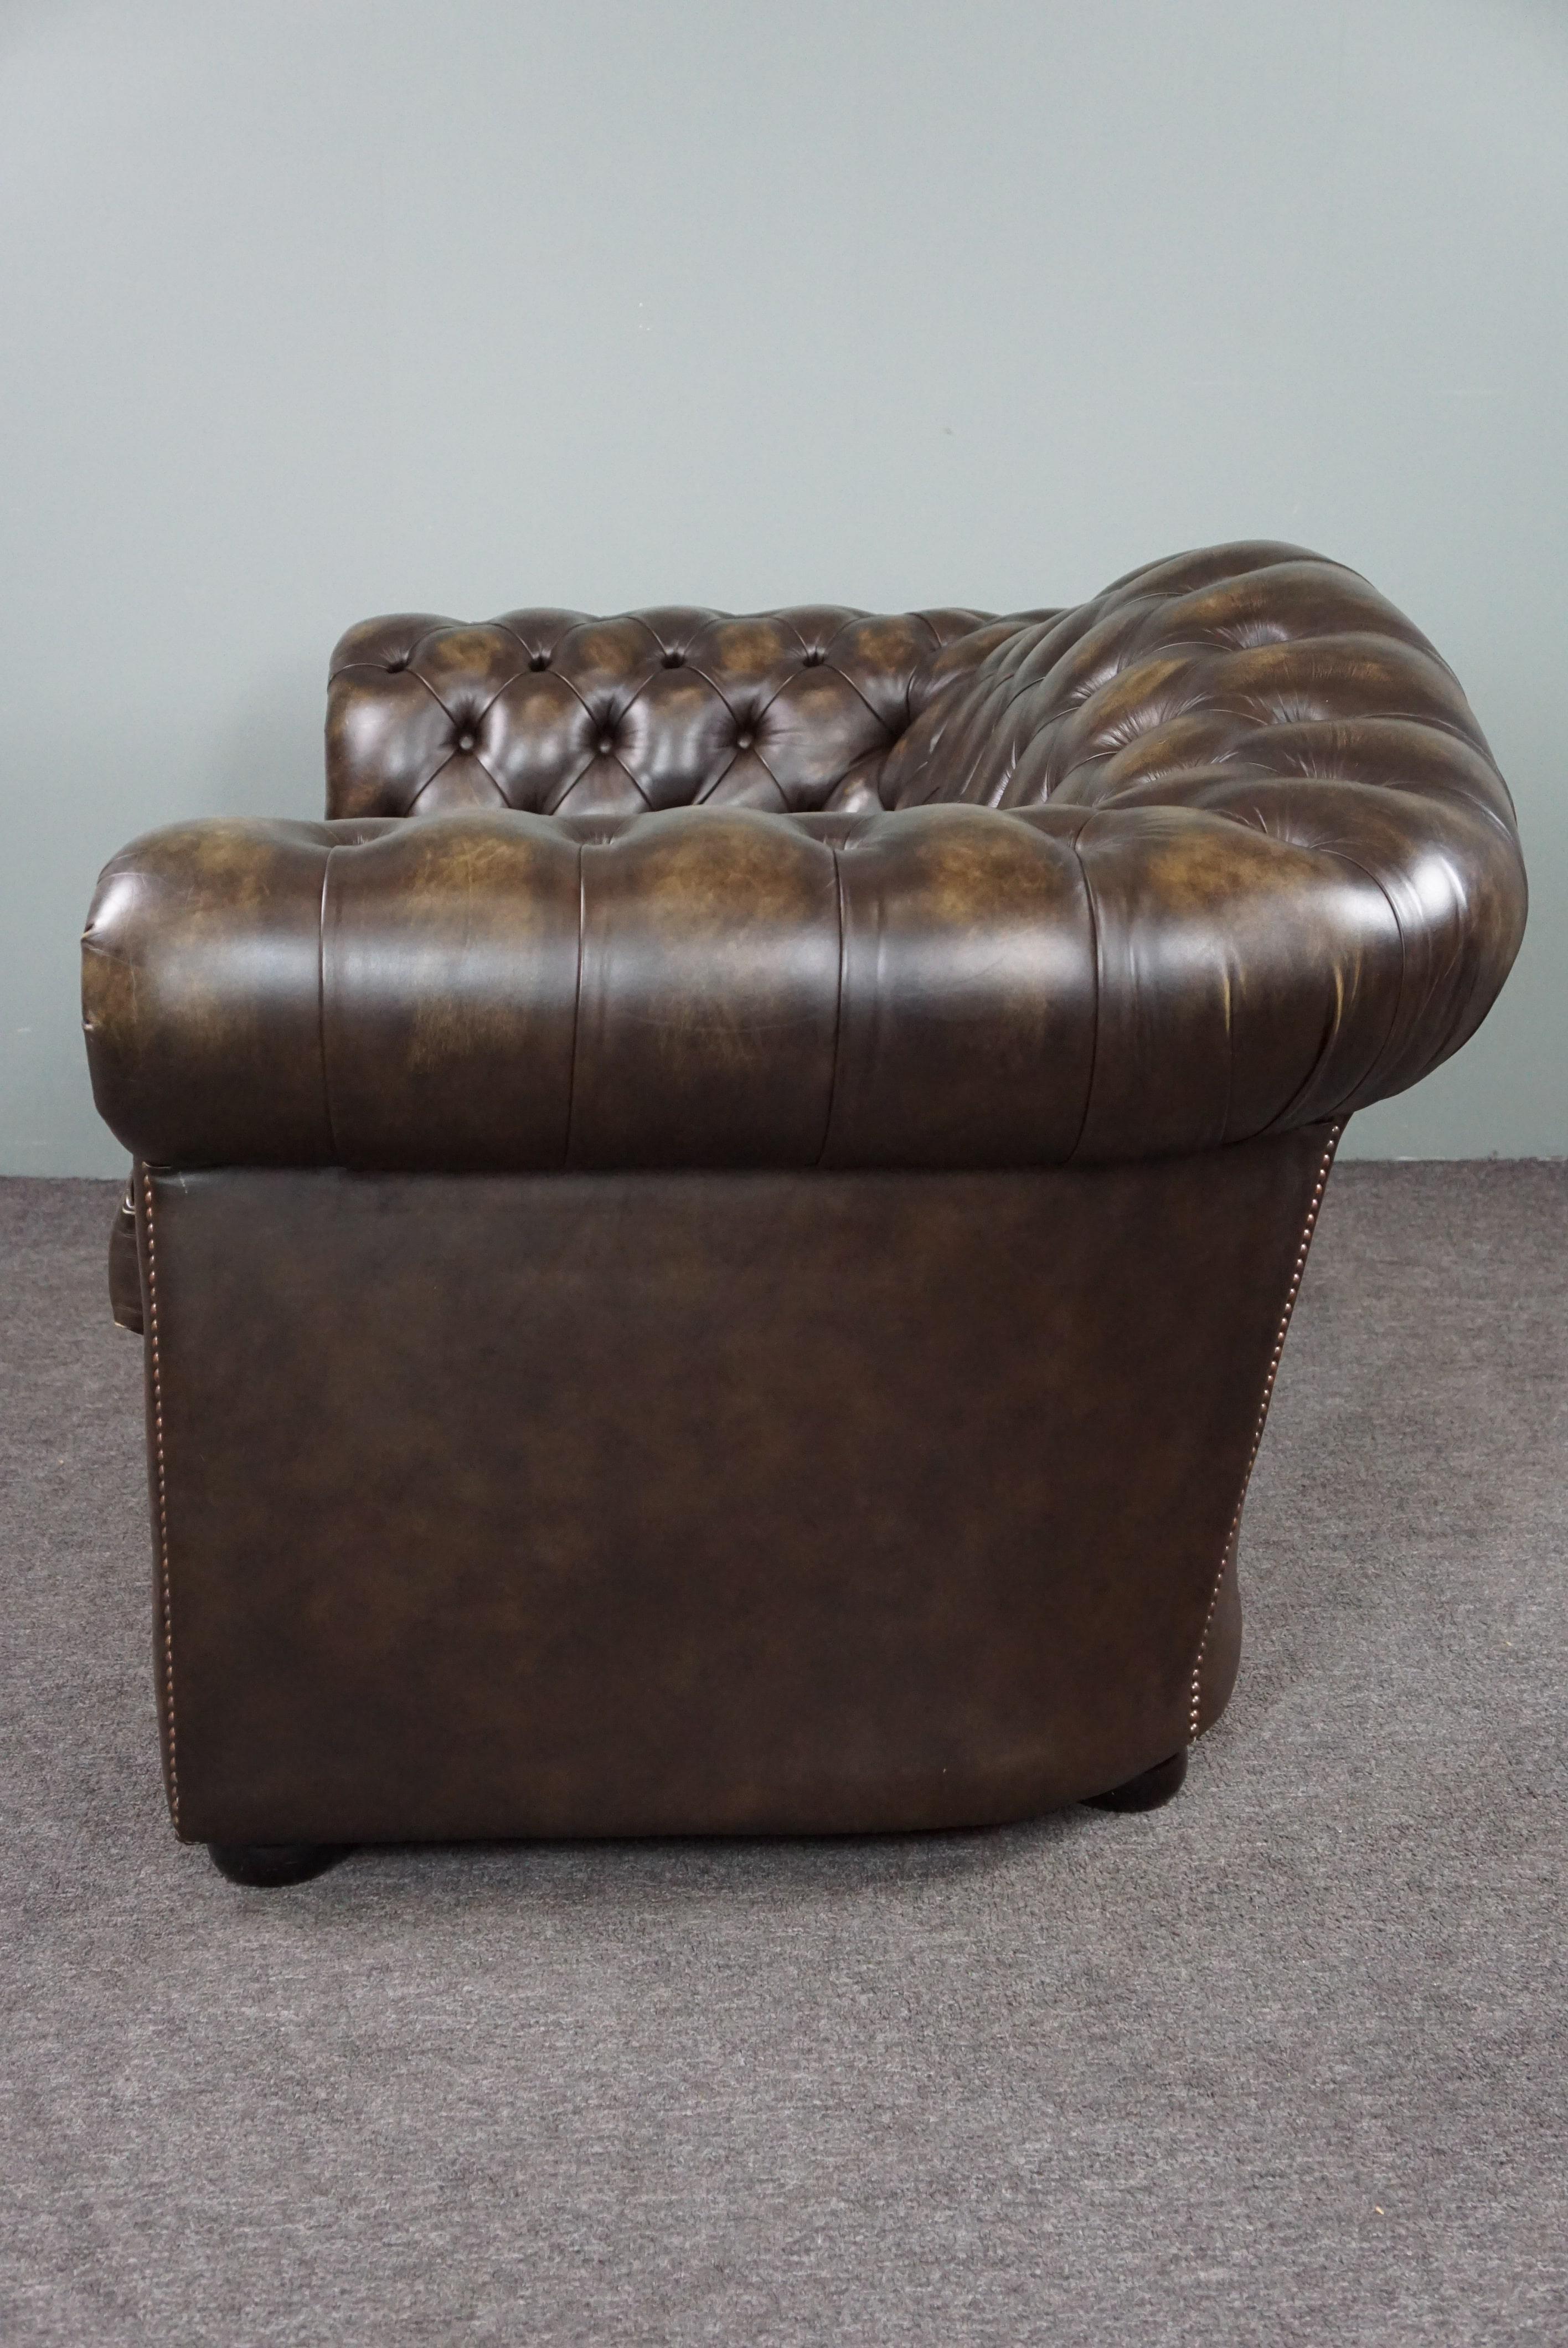 Hand-Crafted Stunning cow leather Chesterfield sofa, 2 seater For Sale